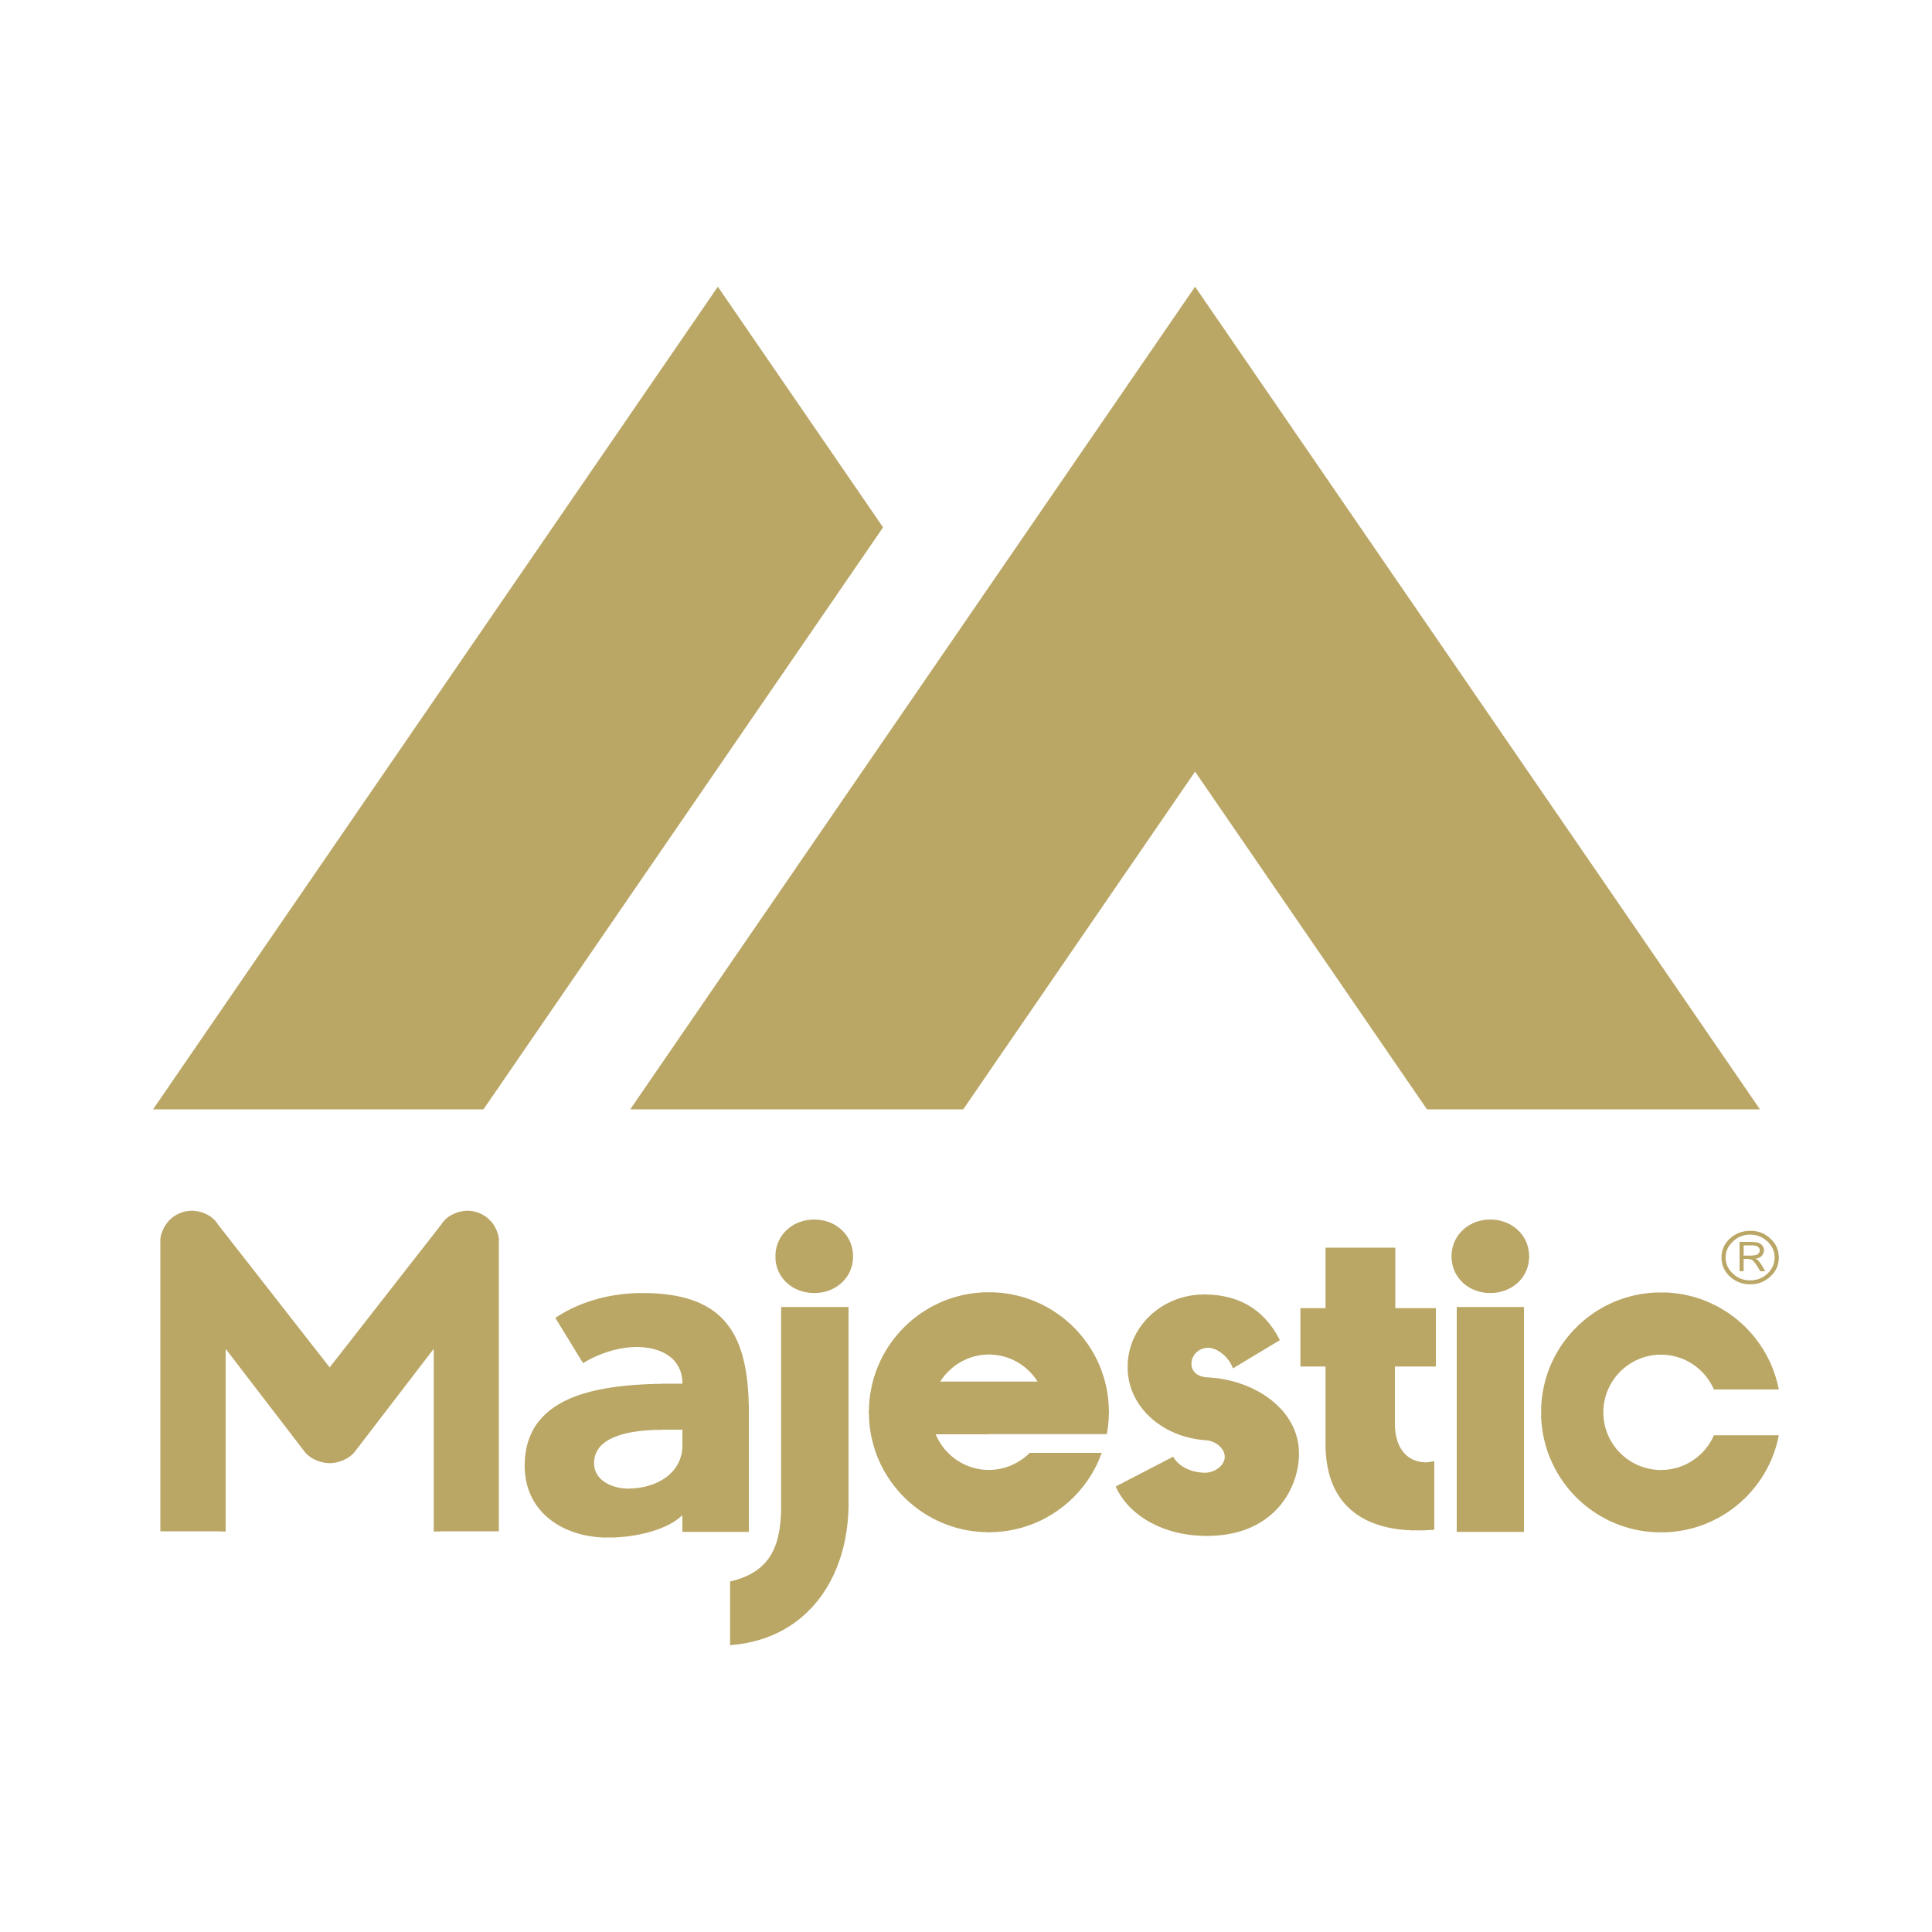 Majestic MLB - Dunn&Co. » Ad Agency Tampa